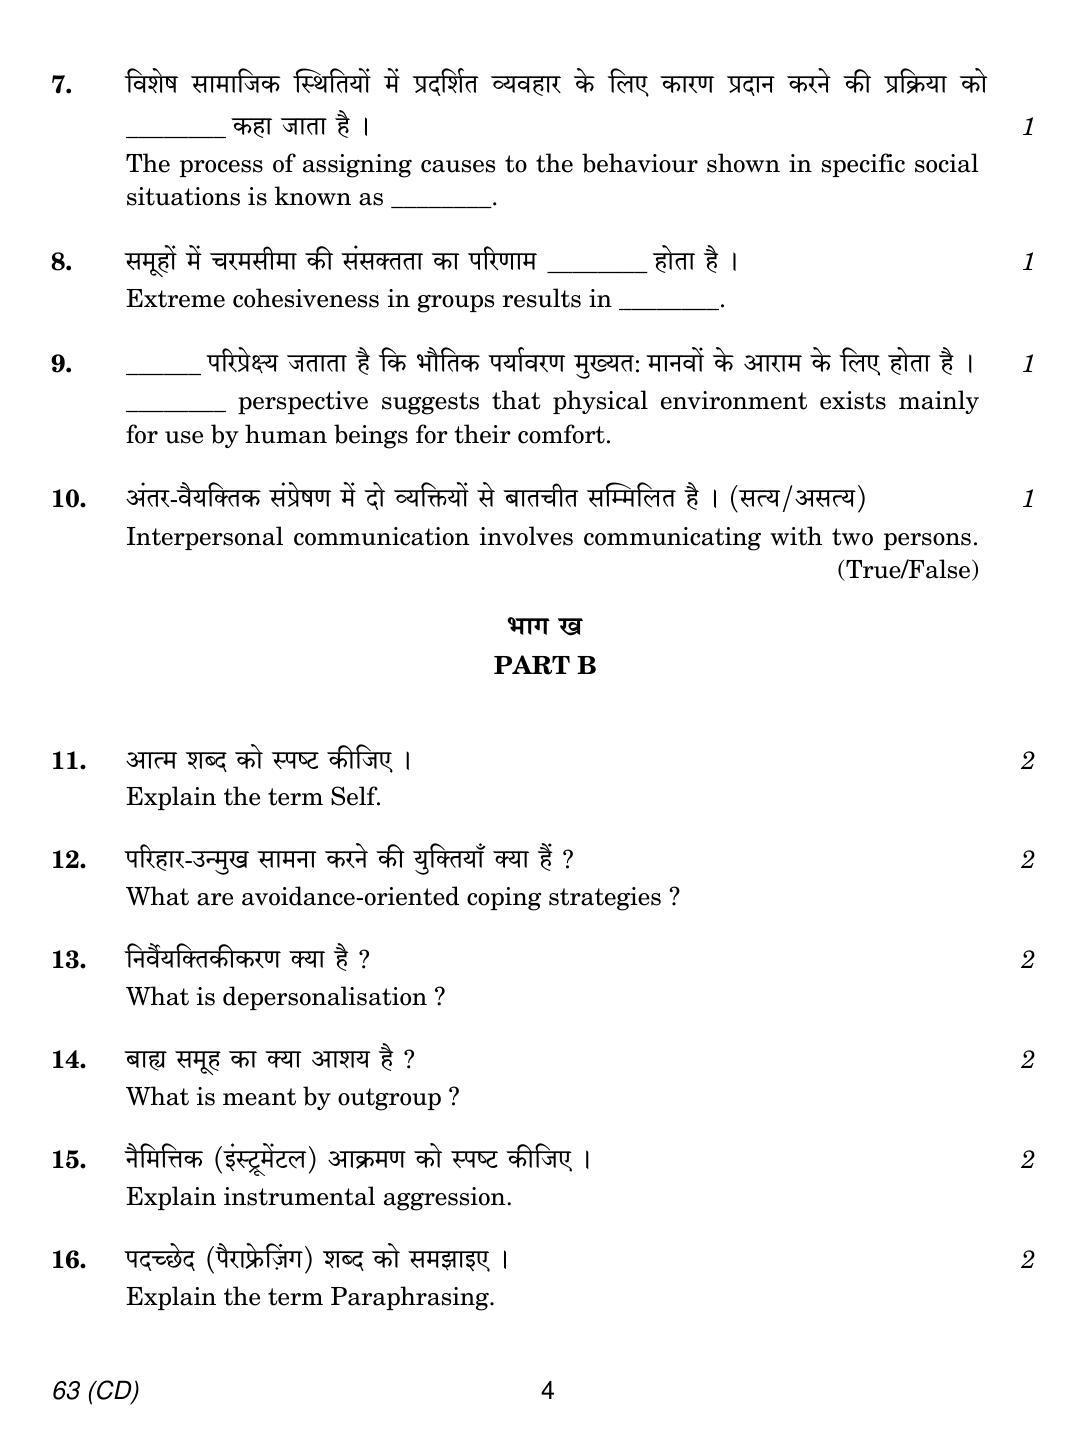 CBSE Class 12 63 PSYCHOLOGY CD 2018 Question Paper - Page 4